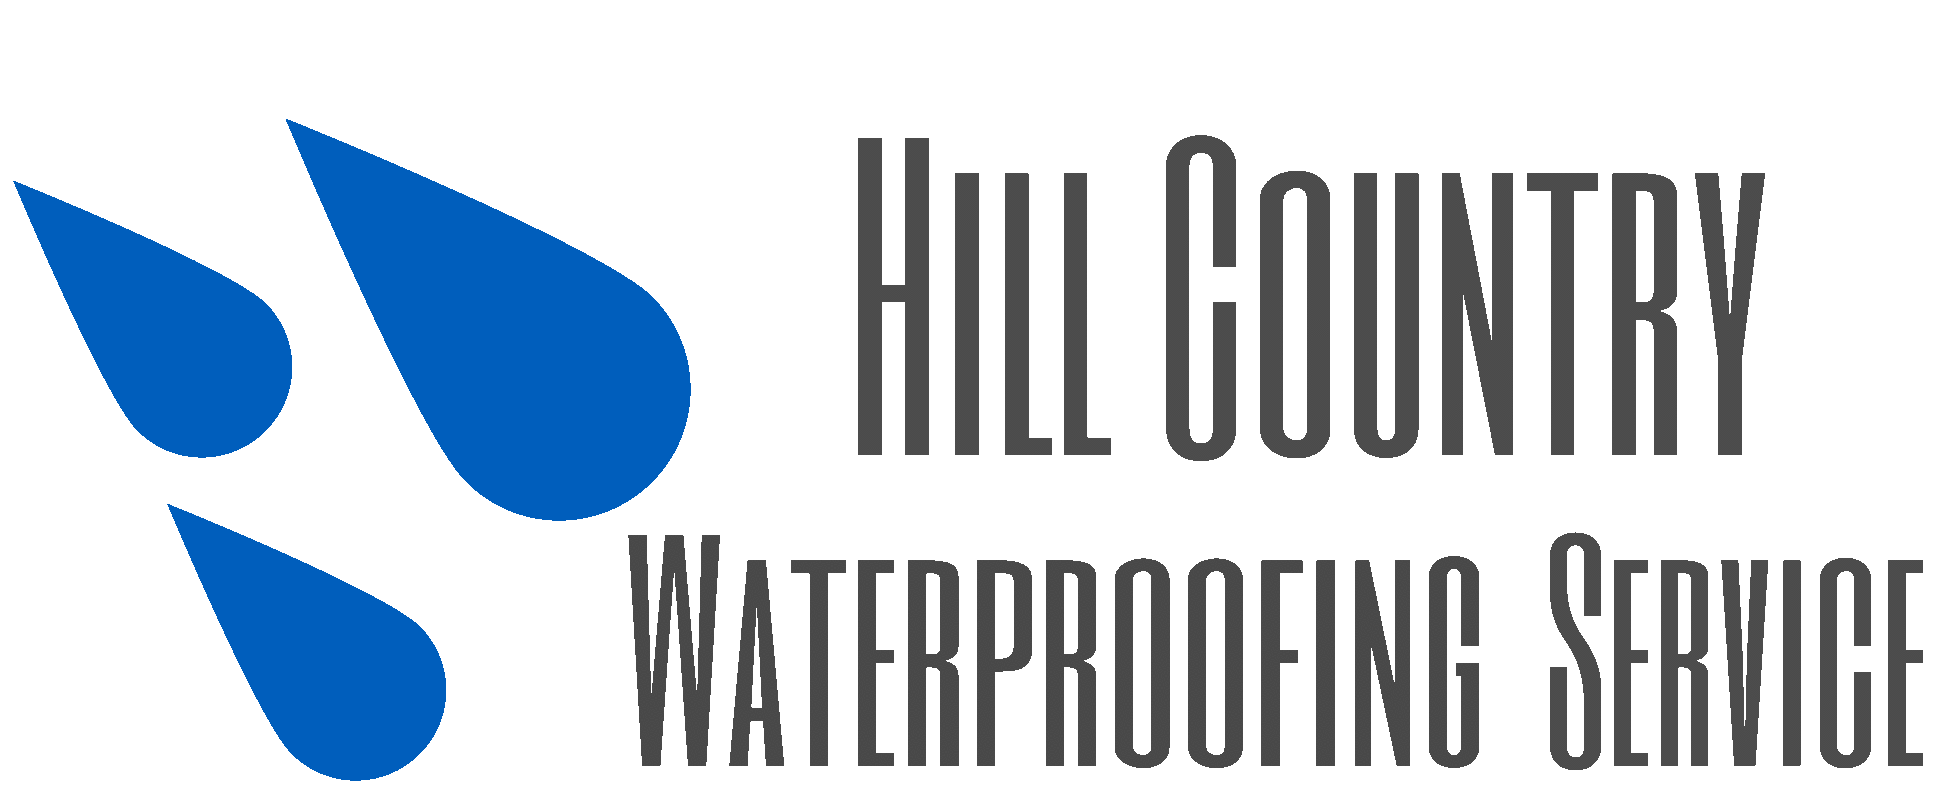 Hill Country Waterproofing Service